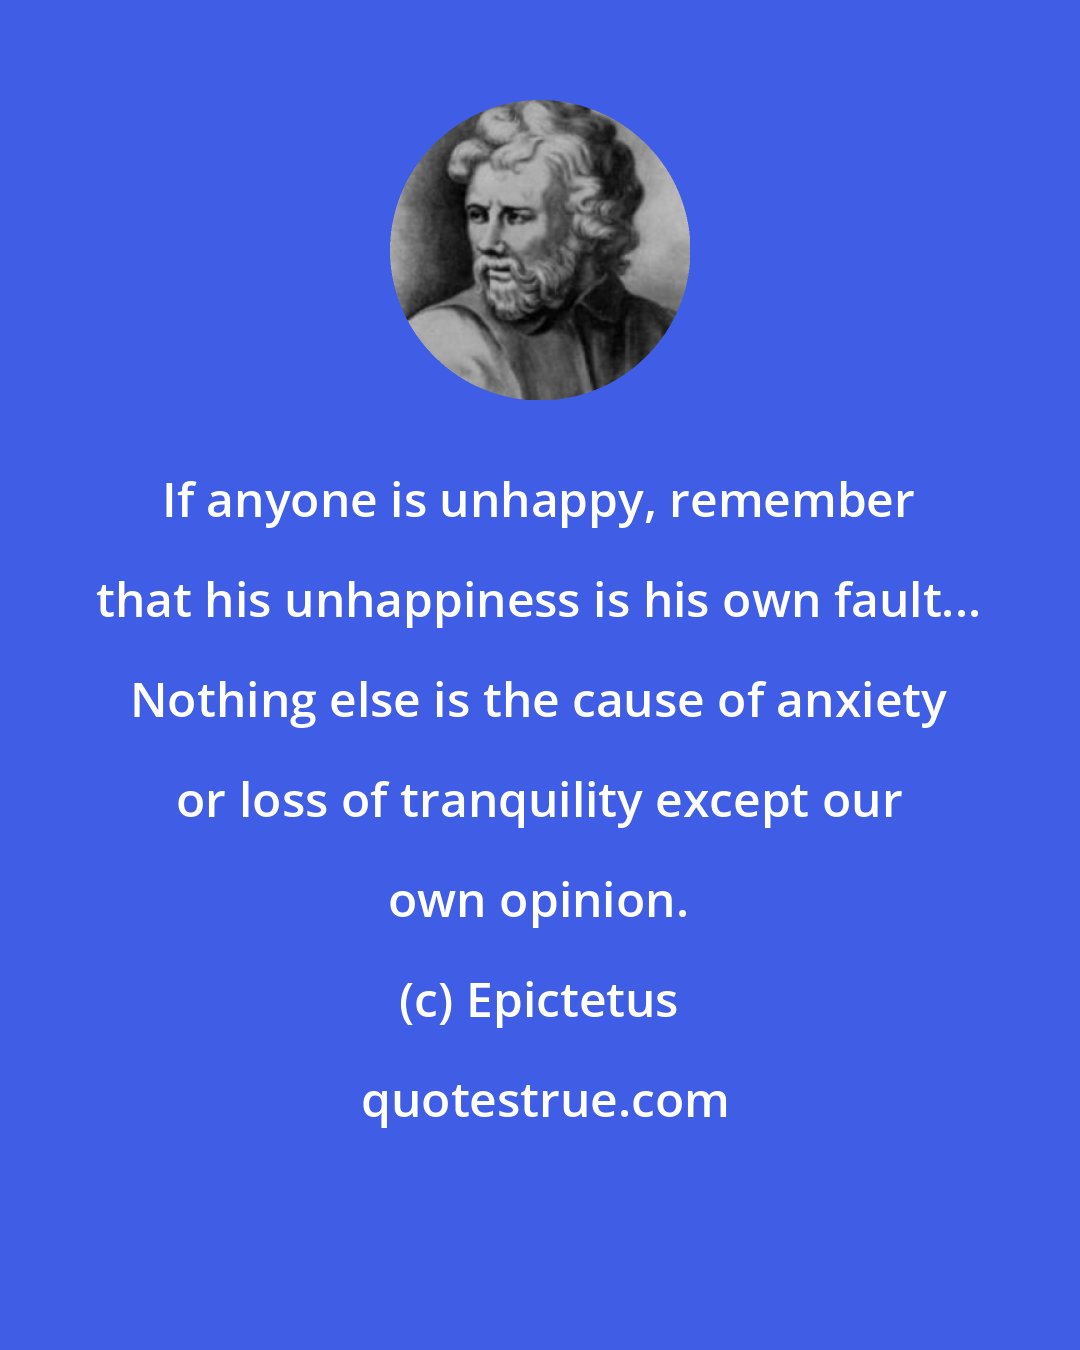 Epictetus: If anyone is unhappy, remember that his unhappiness is his own fault... Nothing else is the cause of anxiety or loss of tranquility except our own opinion.